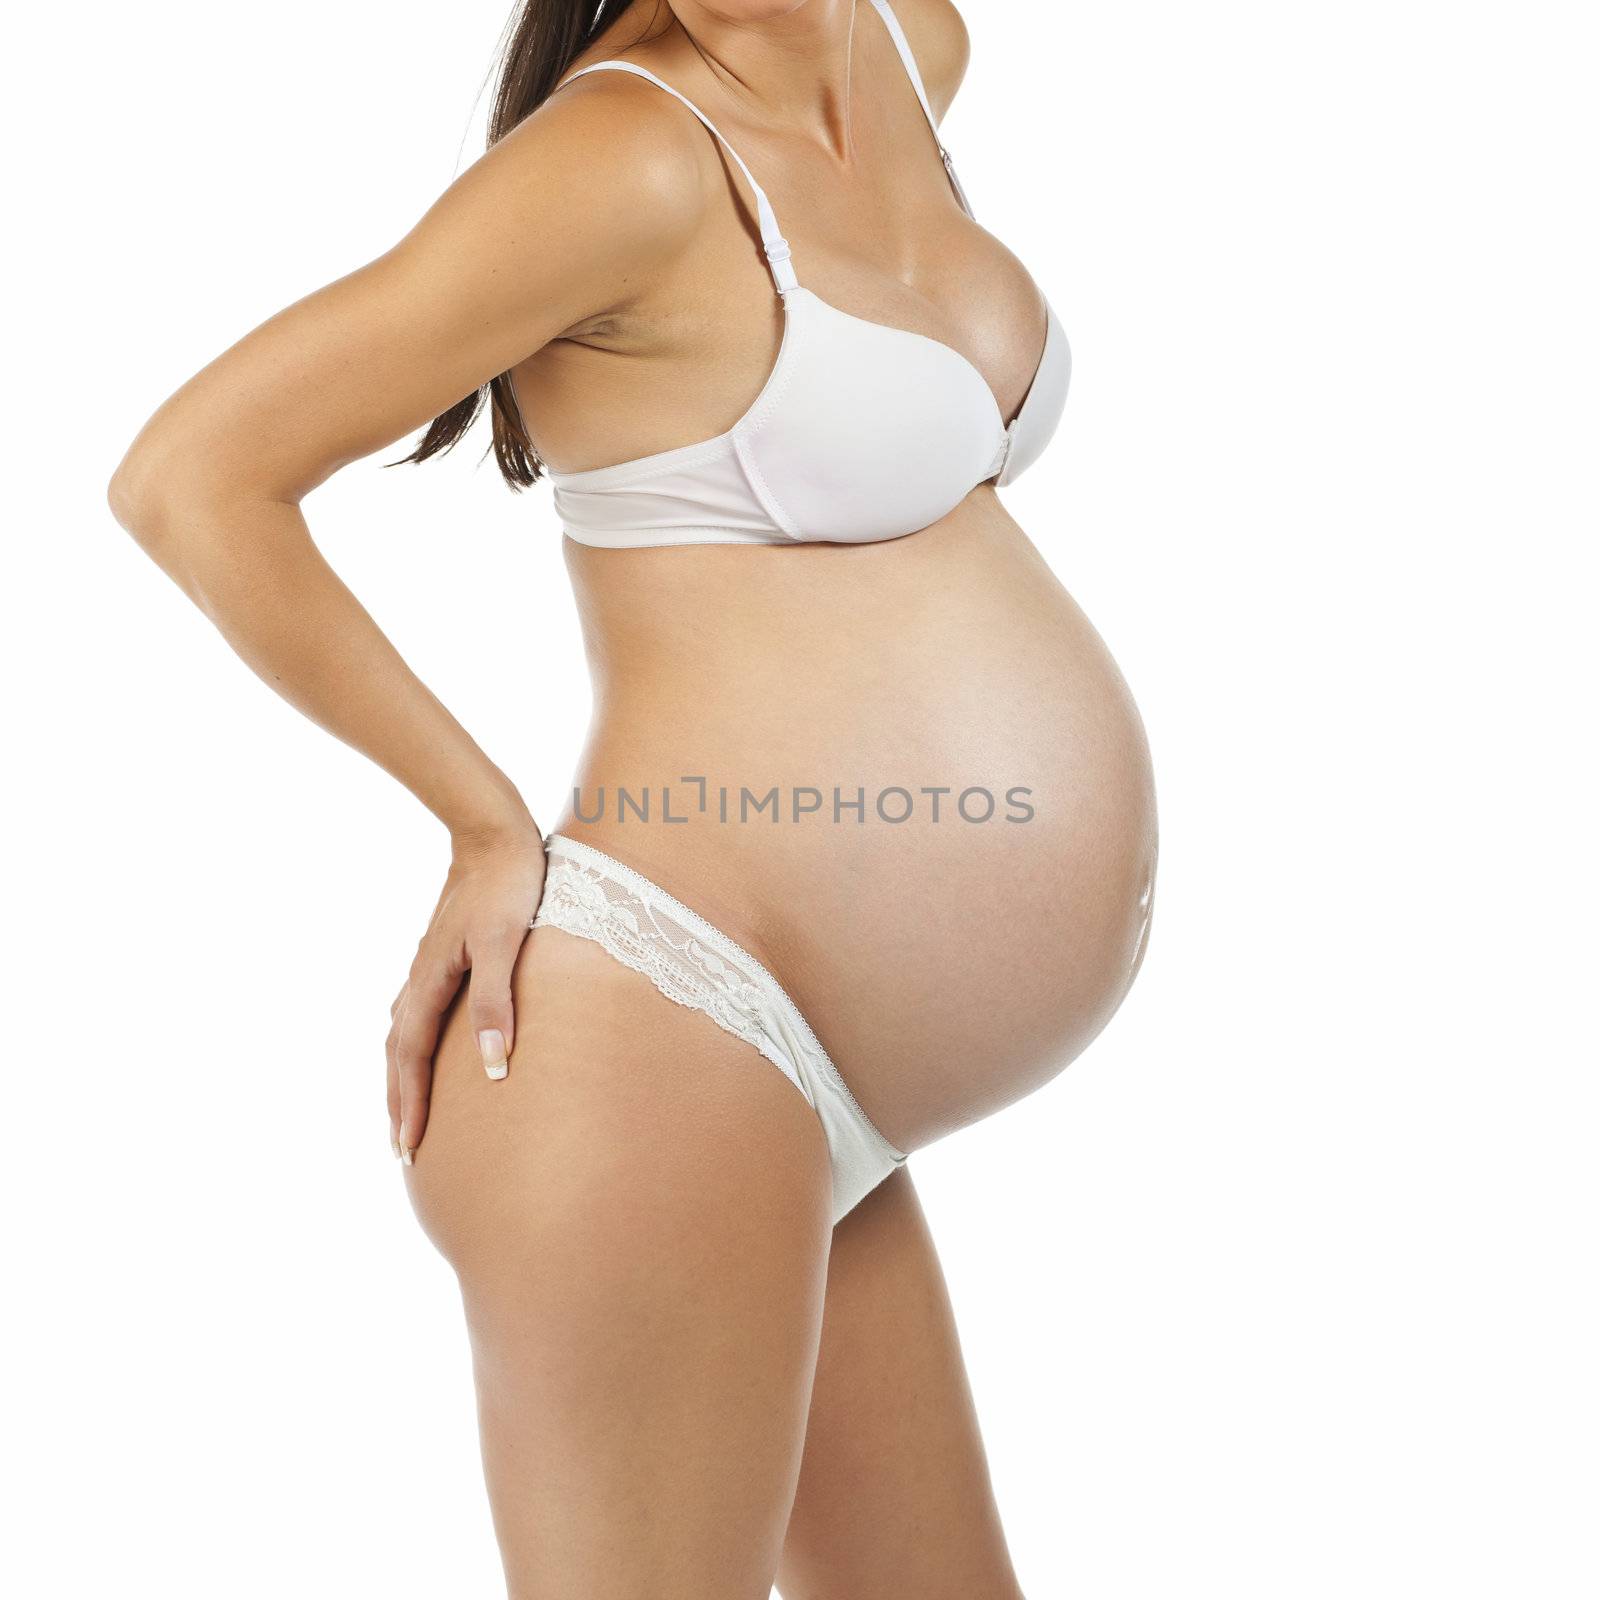 Future mother - Pregnant woman holding back